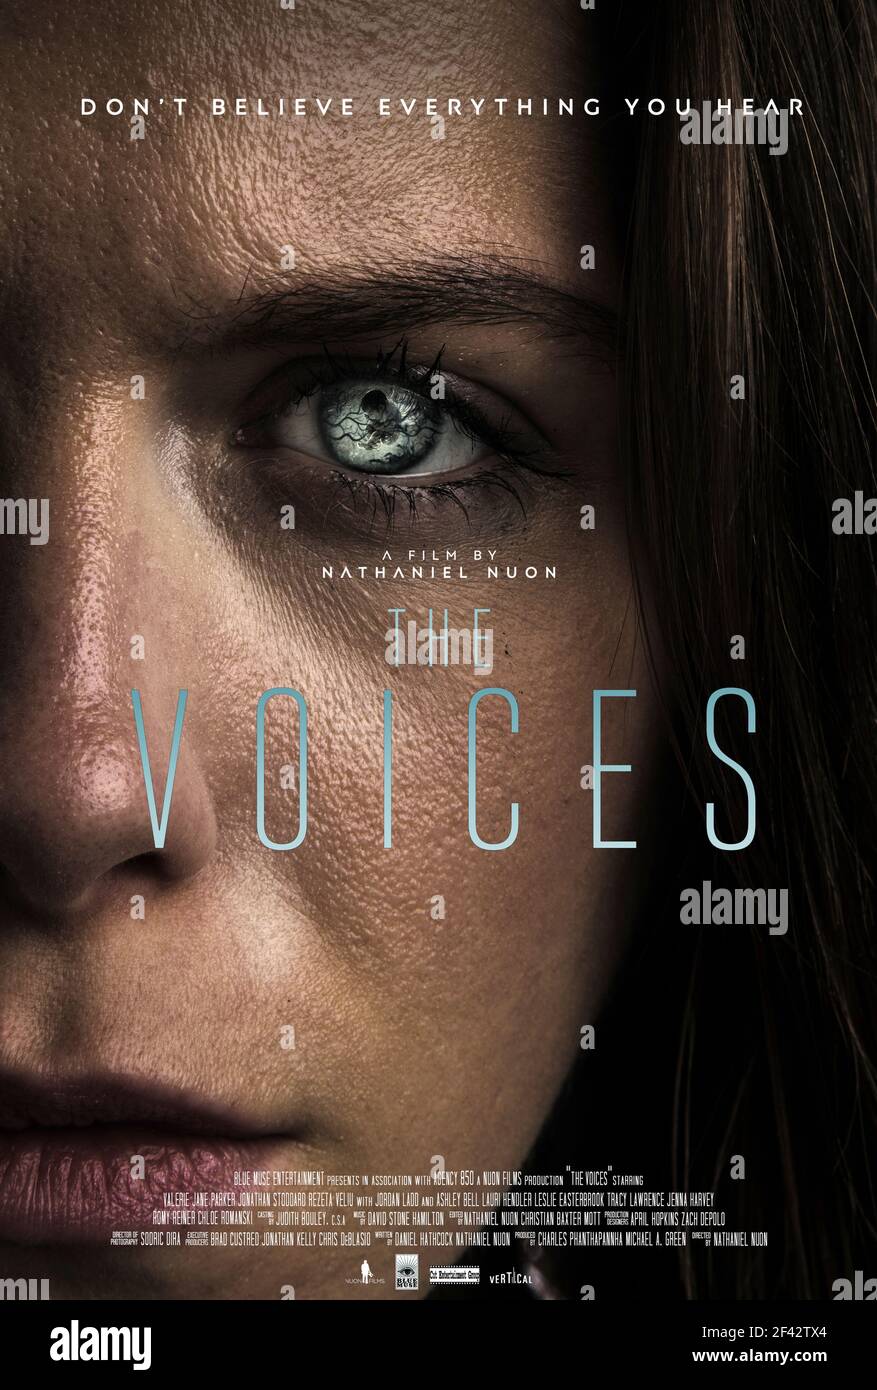 Voices  (2020) directed by Nathaniel Nuon and starring Ashley Bell, Jordan Ladd and Leslie Easterbrook. After surviving a car accident Lilly is left blinded and starts to heat voices from beyond the grave. Stock Photo